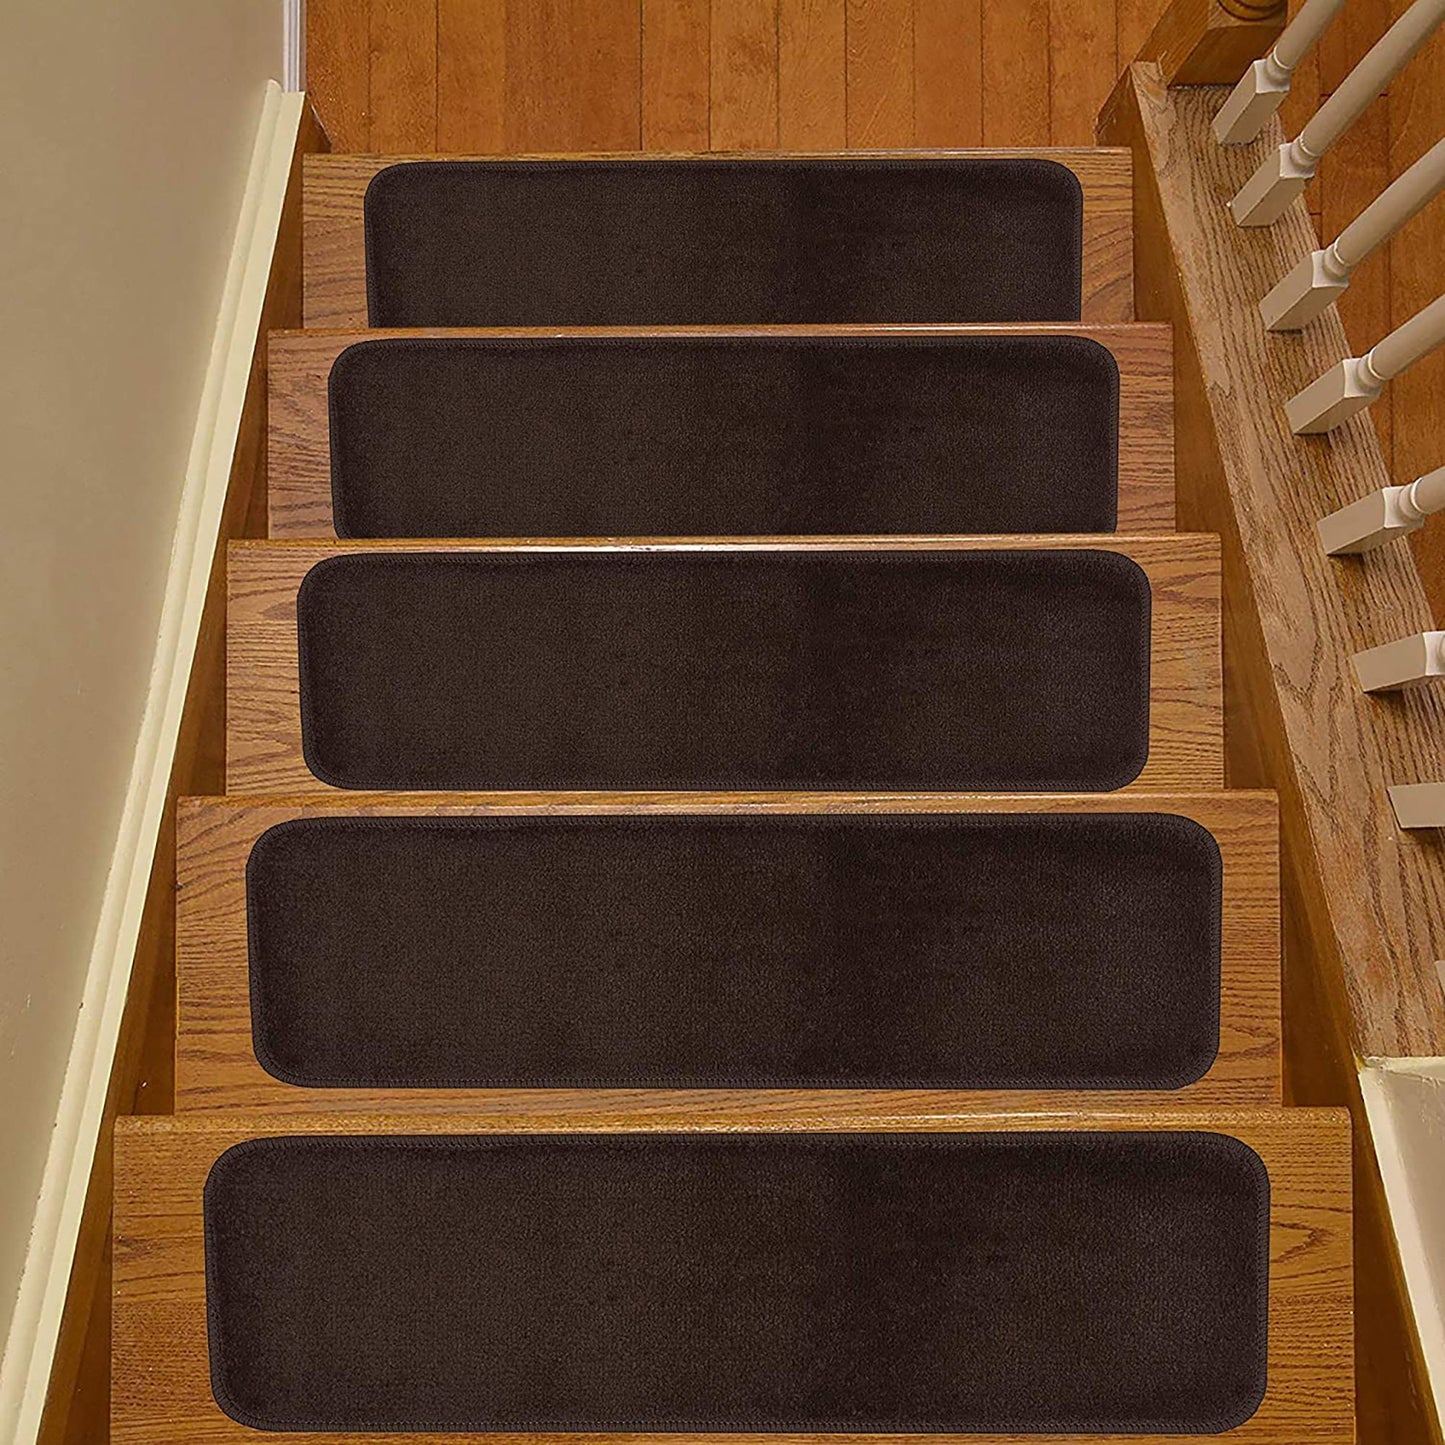 Machine Washable Skid Resistant Stair Treads with Pet Friendly Cut Pile Many Color and Set Option Available Size is 8.5 inches X 30 Inches